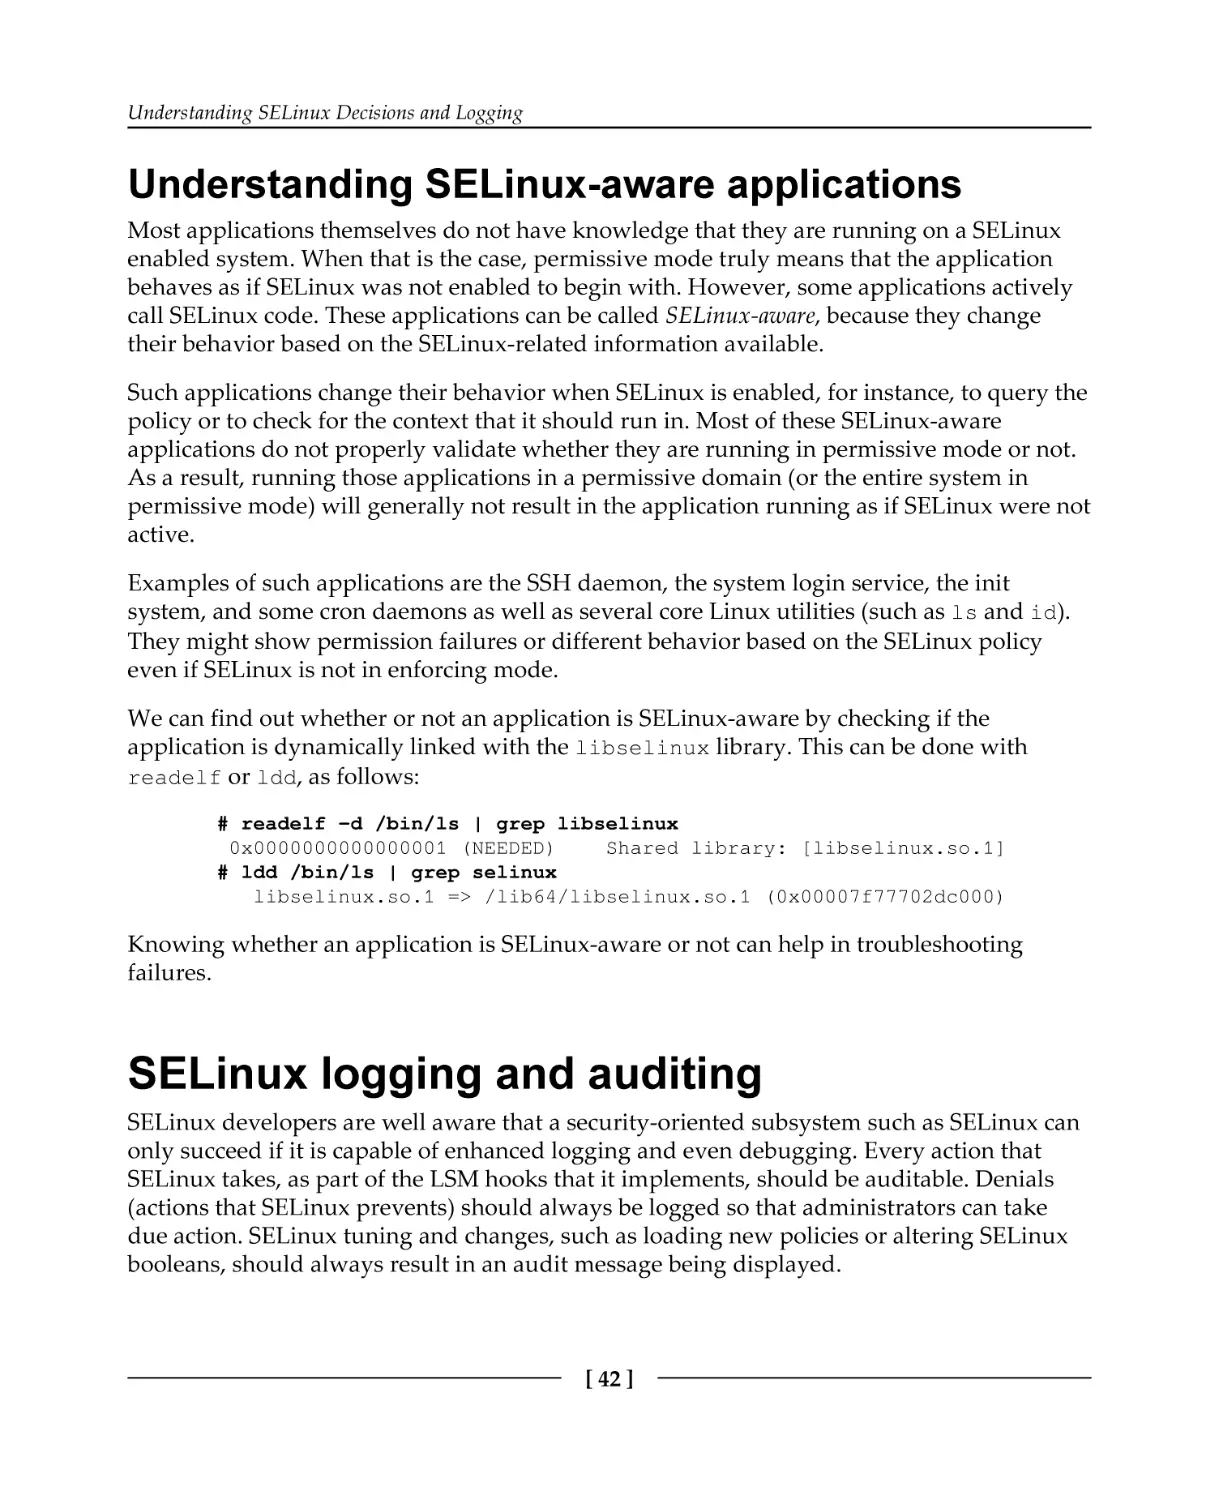 Understanding SELinux-aware applications
SELinux logging and auditing